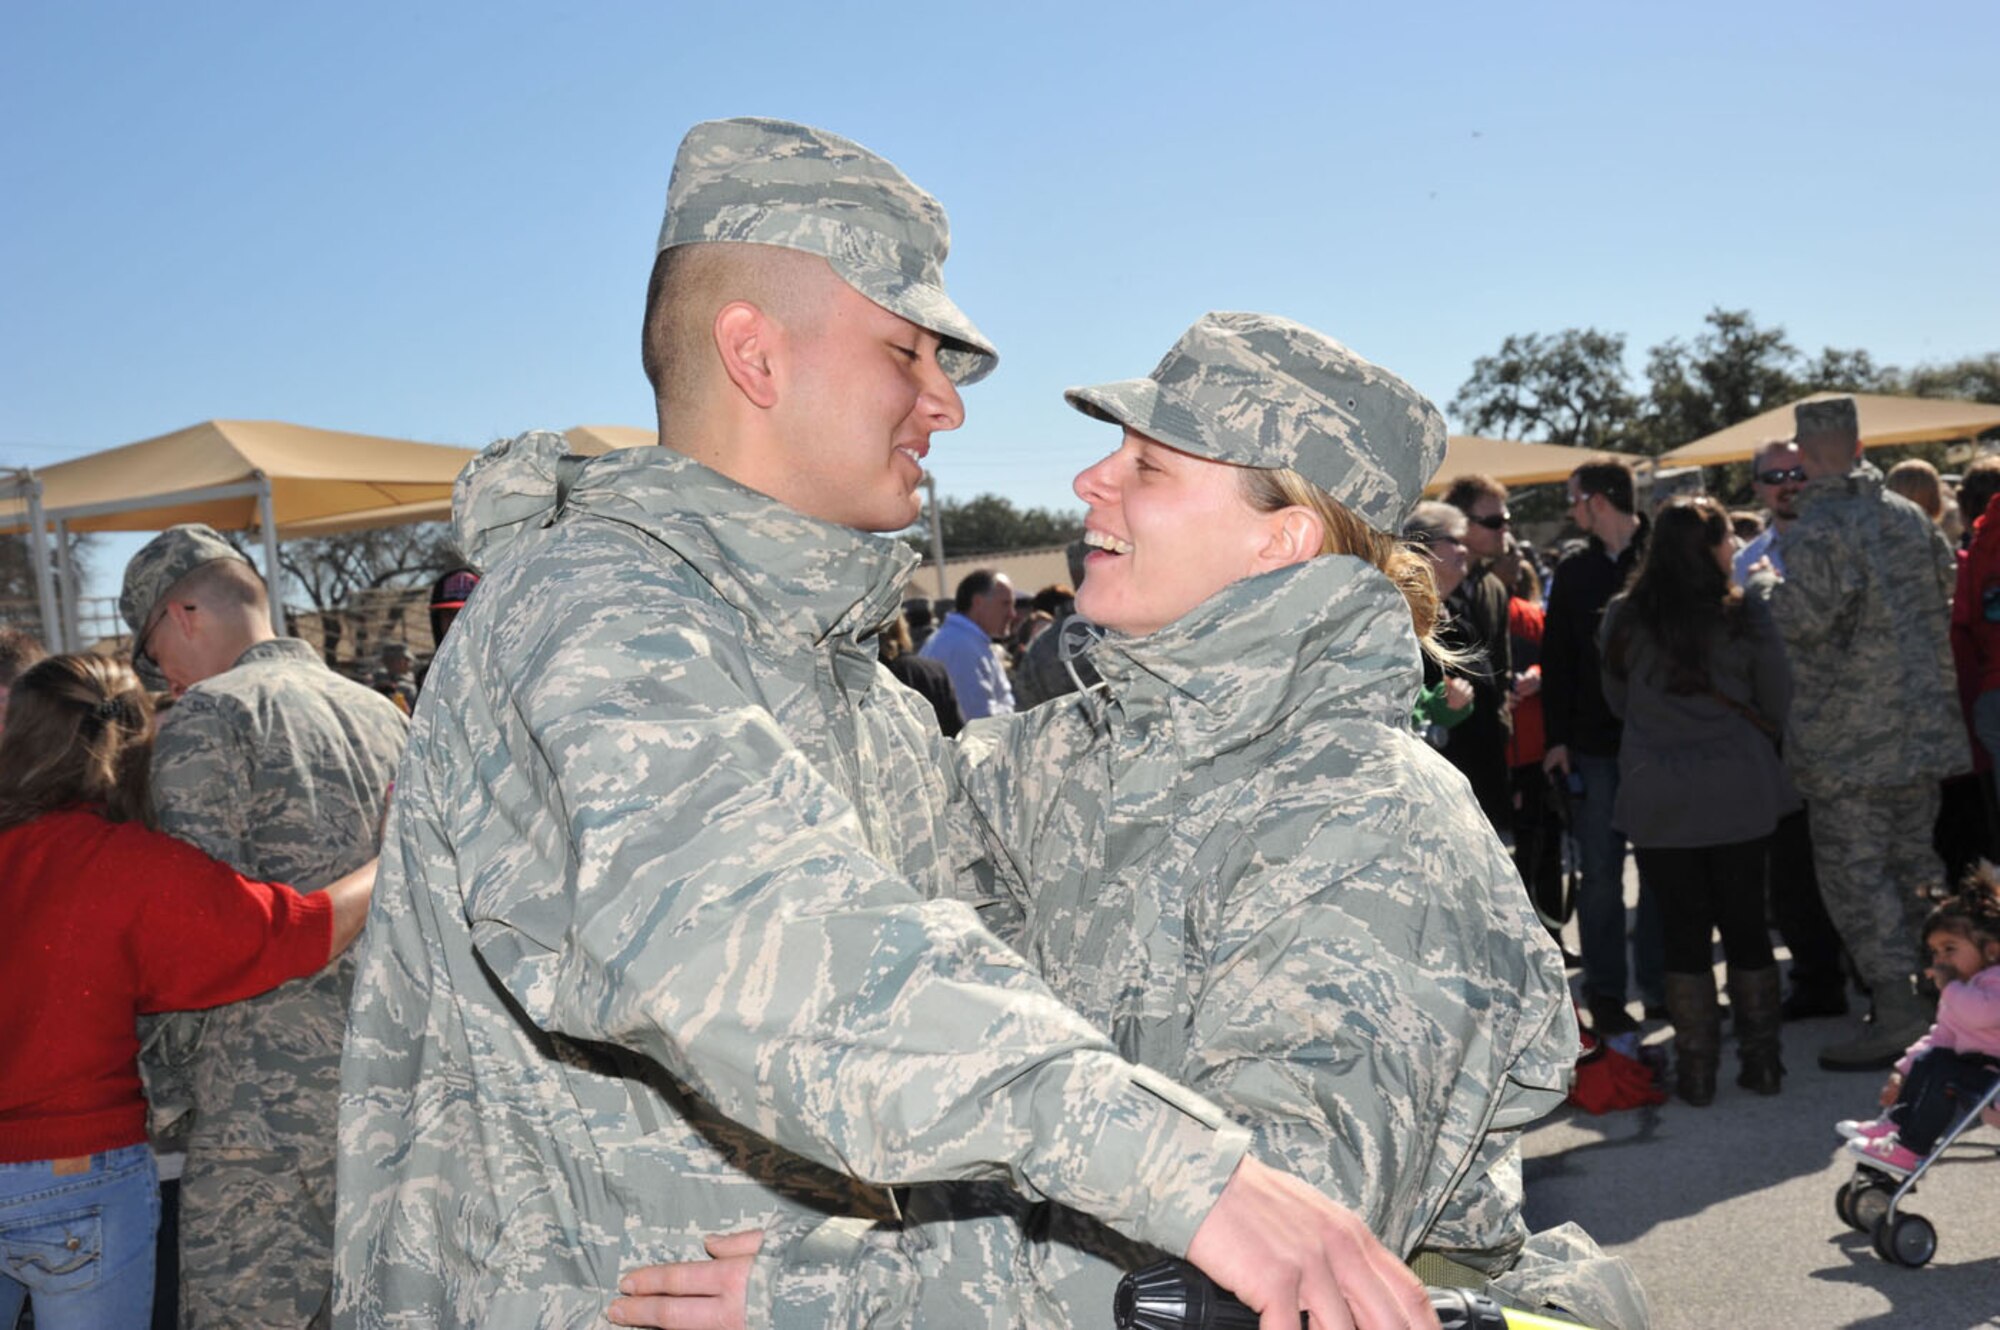 Airman Basic Justus Sanchez hugs his mother, Air Force basic trainee Lori Huayacla, following the Airman Coin and Retreat Ceremony Thursday at Joint Base San Antonio-Lackland. The ceremony symbolizes a service member's transition from basic trainee to Airman. (U.S. Air Force photo/Alan Boedeker)